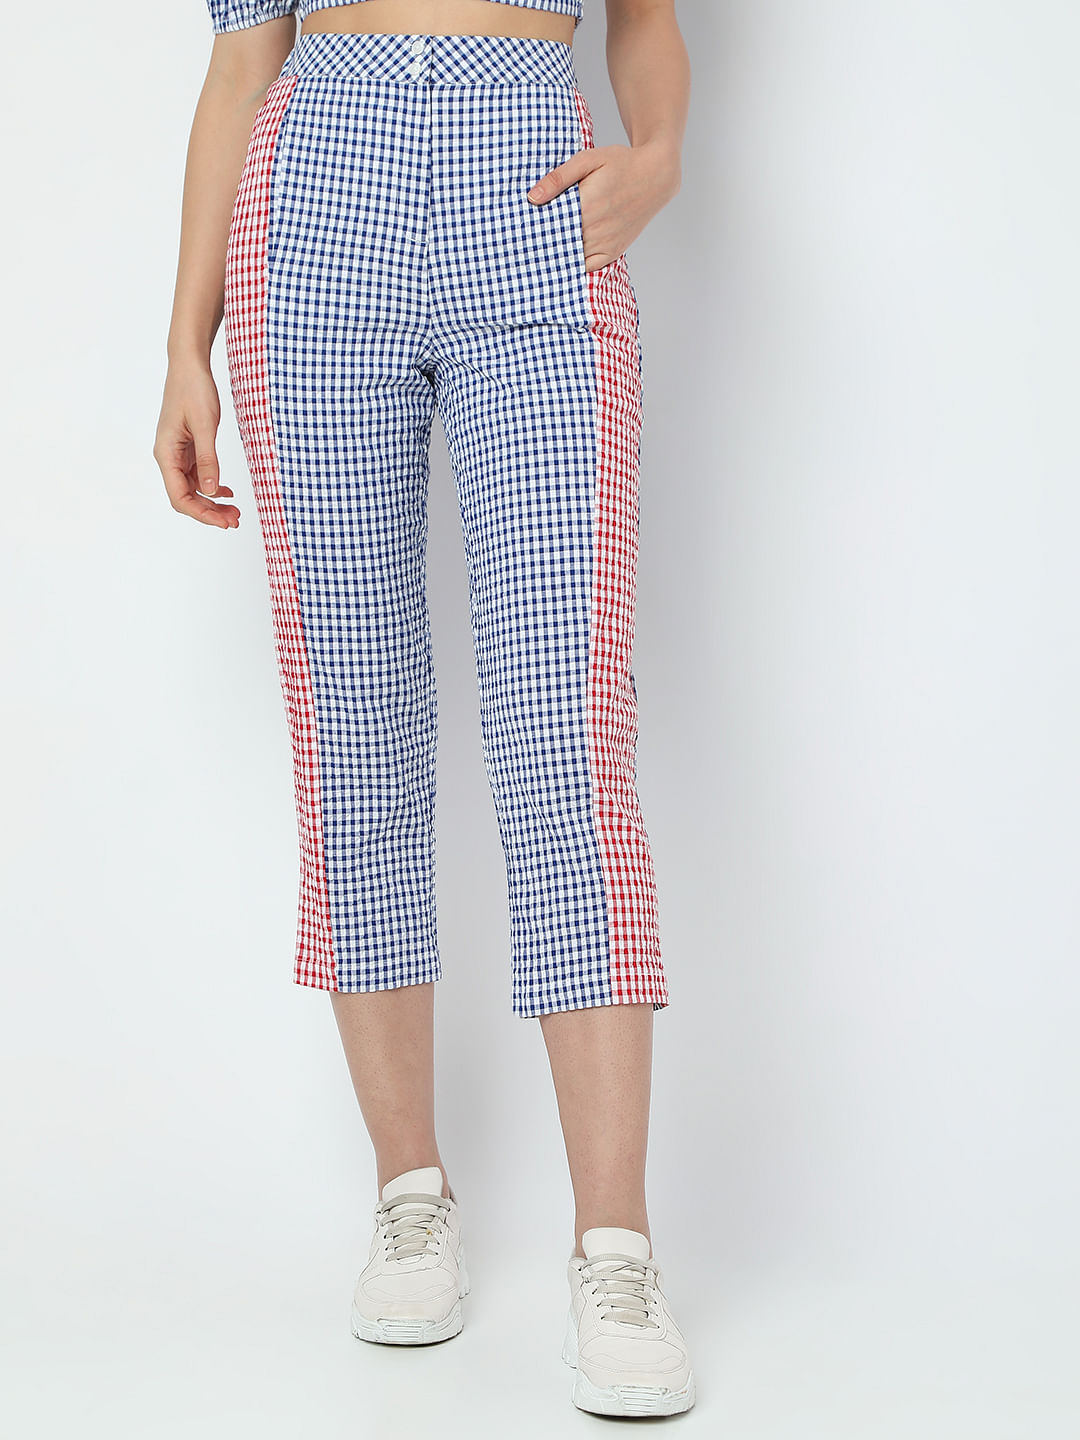 Checked Trousers  Buy Checked Trousers Online Starting at Just 395   Meesho